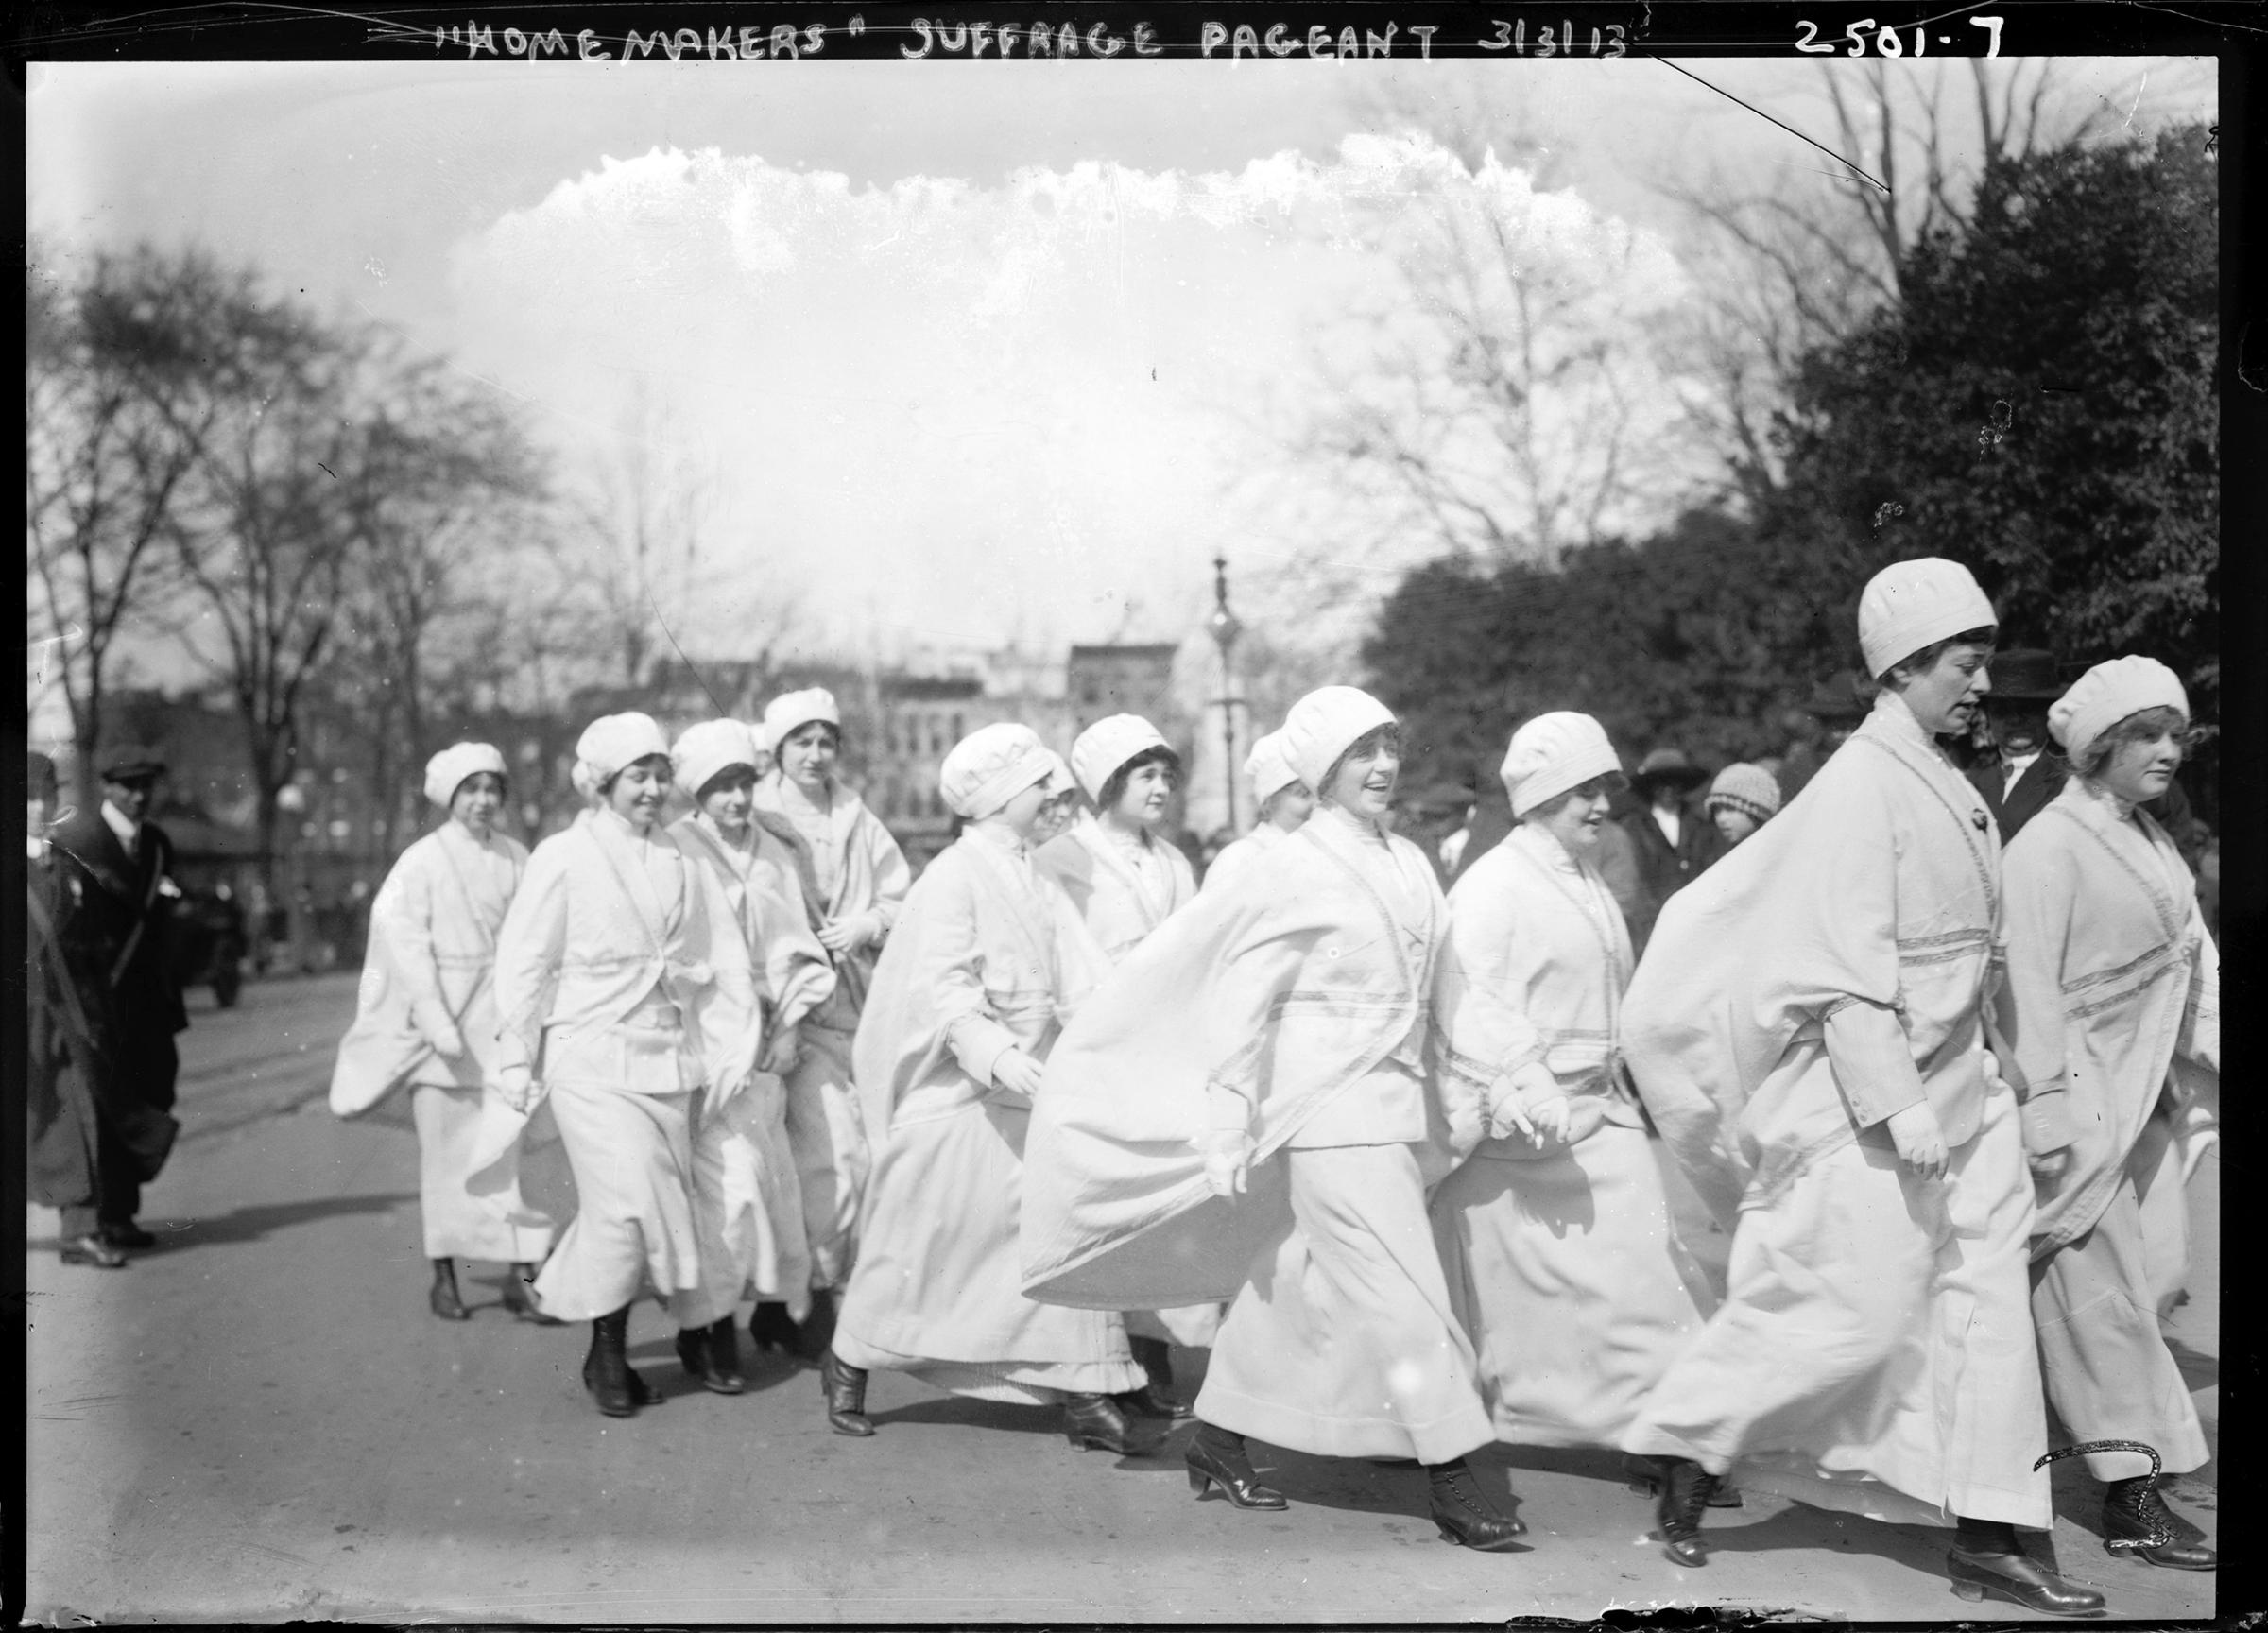 Woman Suffrage Parade held in Washington, D.C., March 3, 1913.